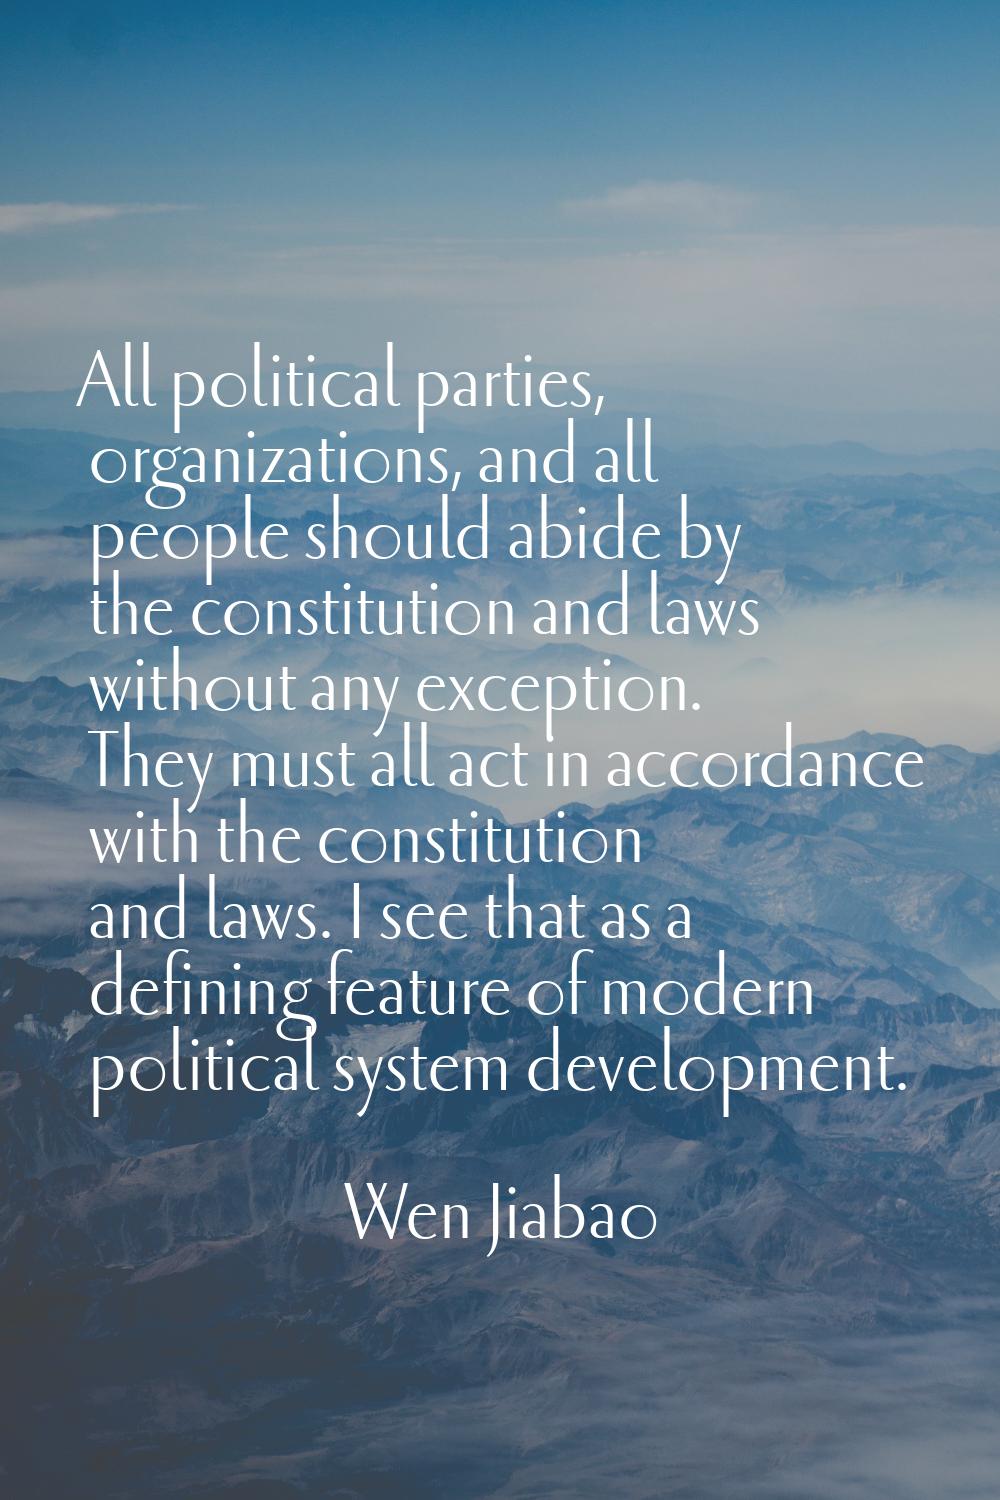 All political parties, organizations, and all people should abide by the constitution and laws with